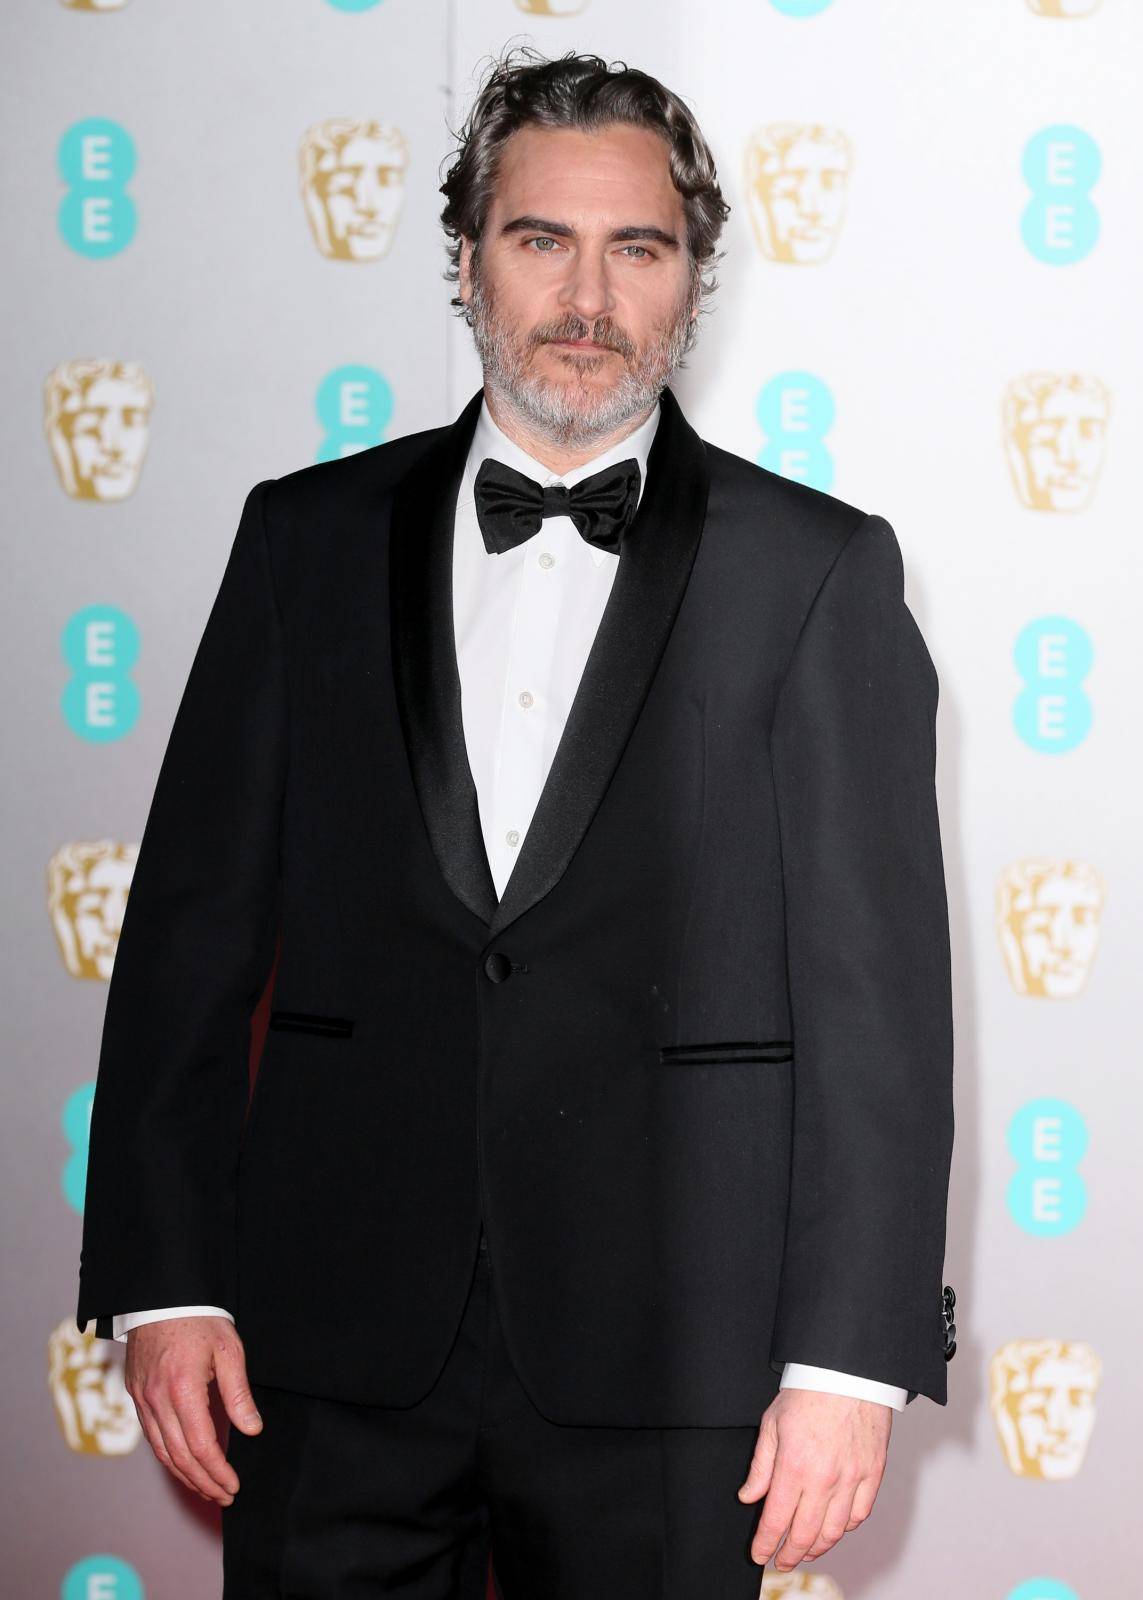 The EE British Academy Film Awards 2020 held at the Royal Albert Hall